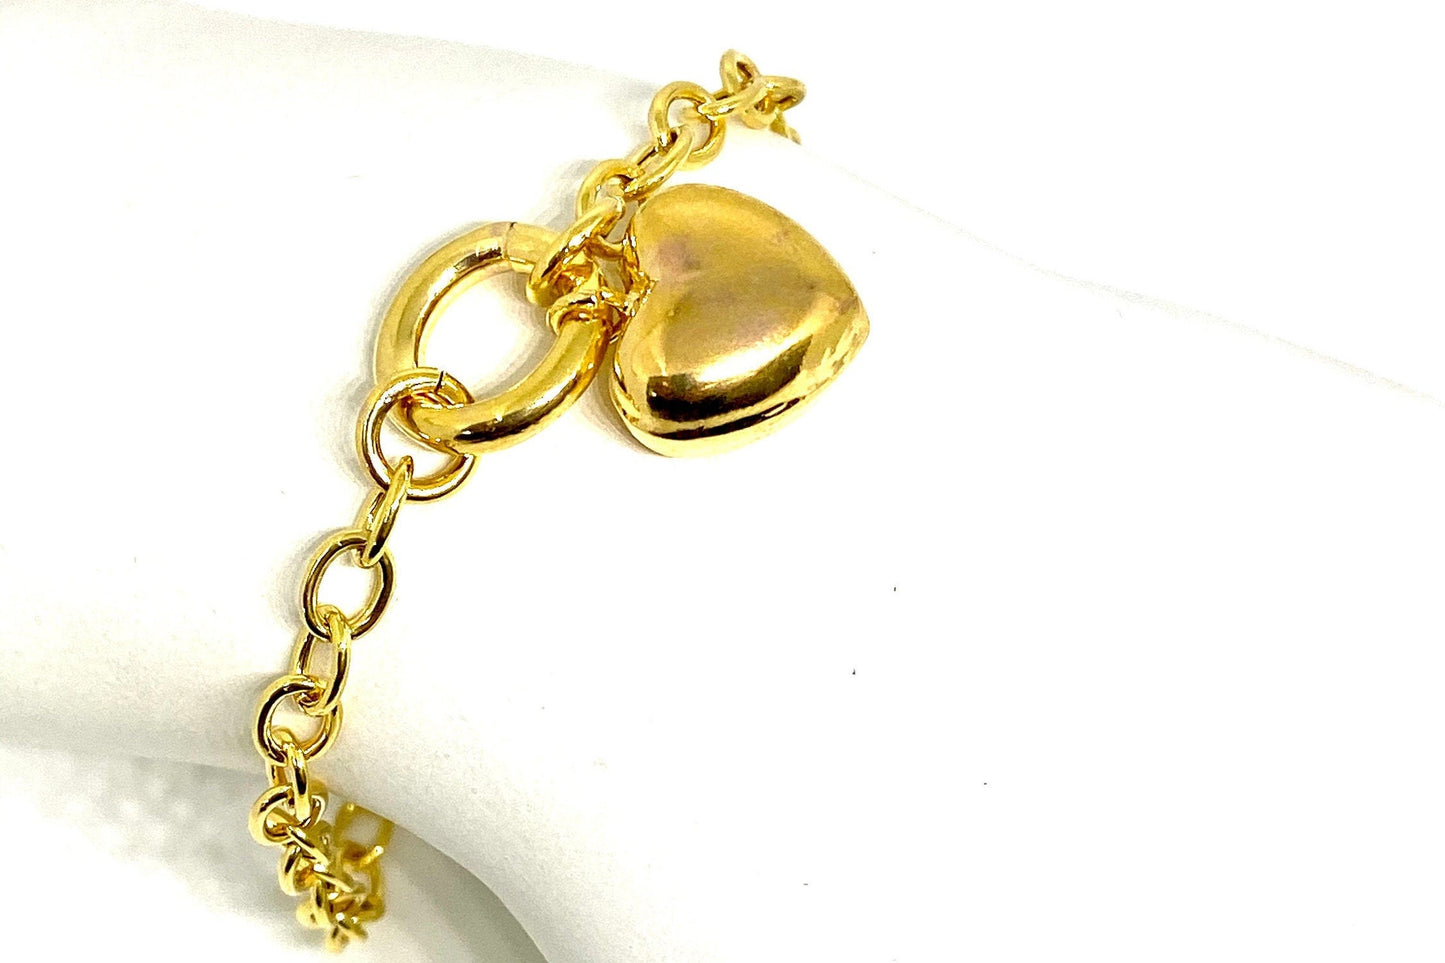 Yellow Gold Over Sterling Silver Puffy Heart Charm Toggle Clasp Bracelet